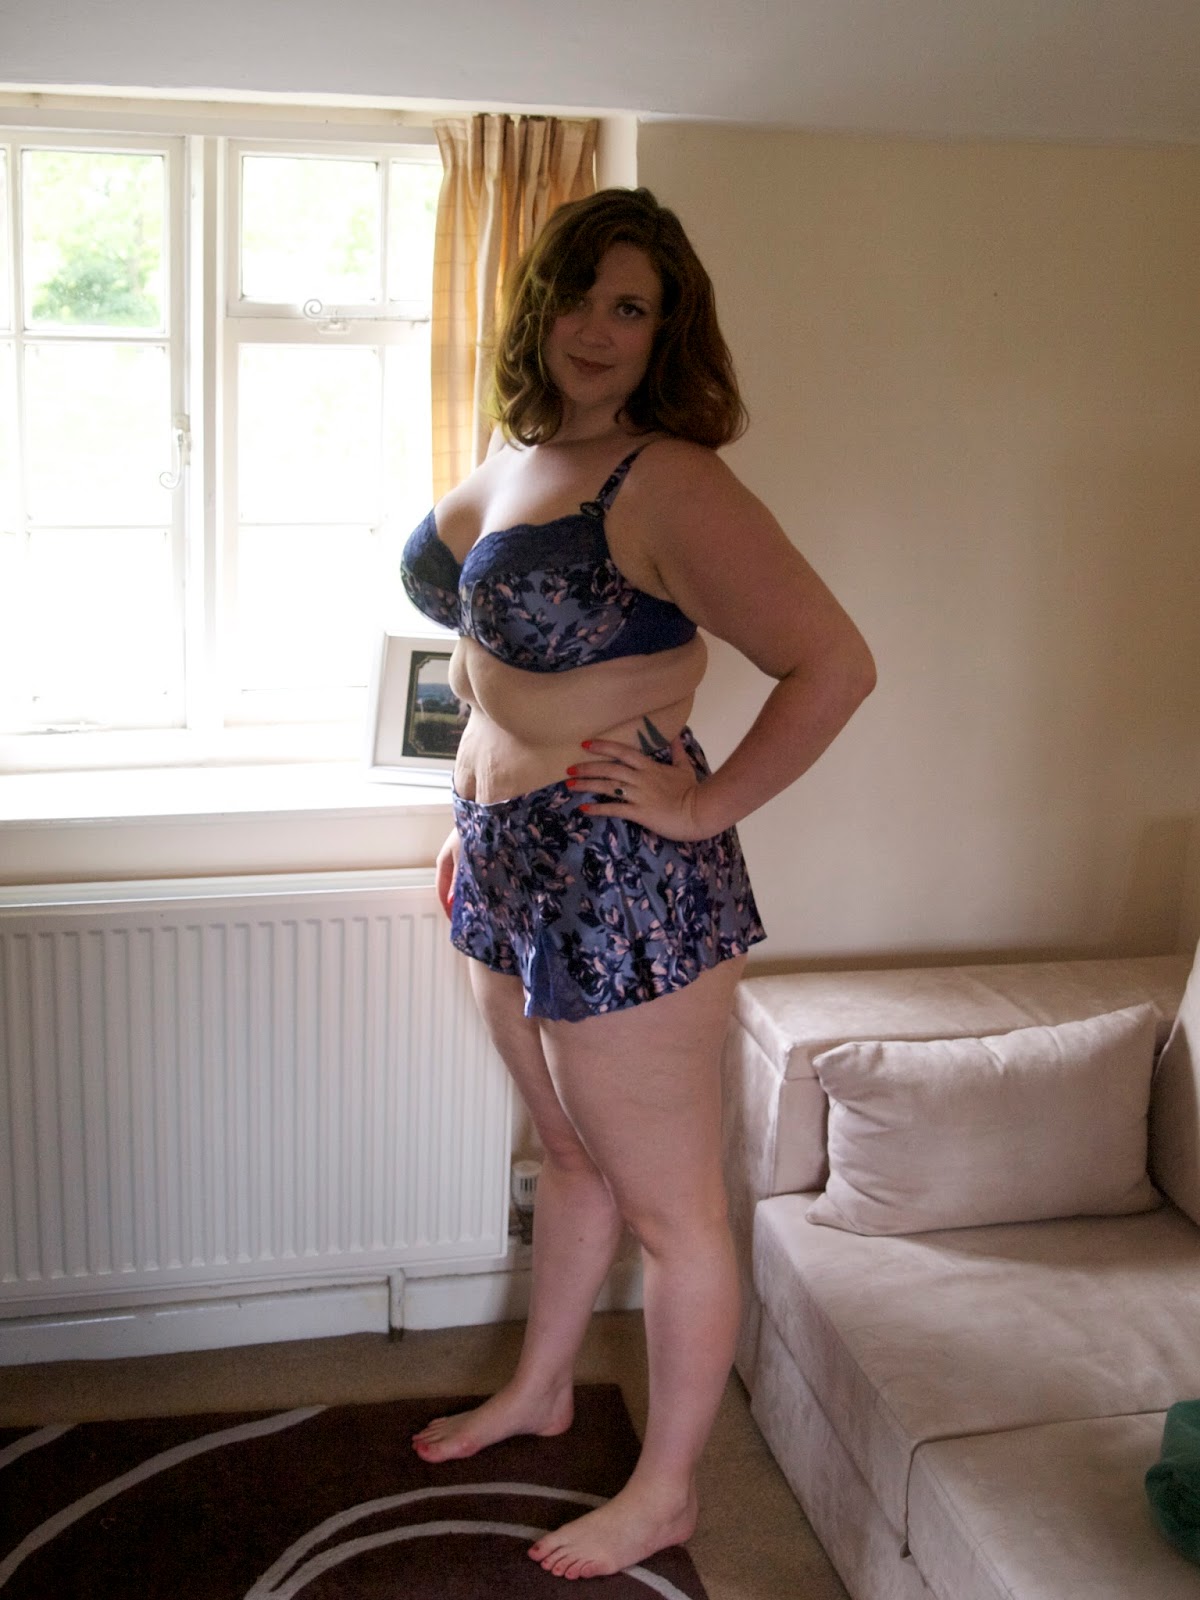 Curvy Girl Thin Playful Lingerie from Marks & Spencer